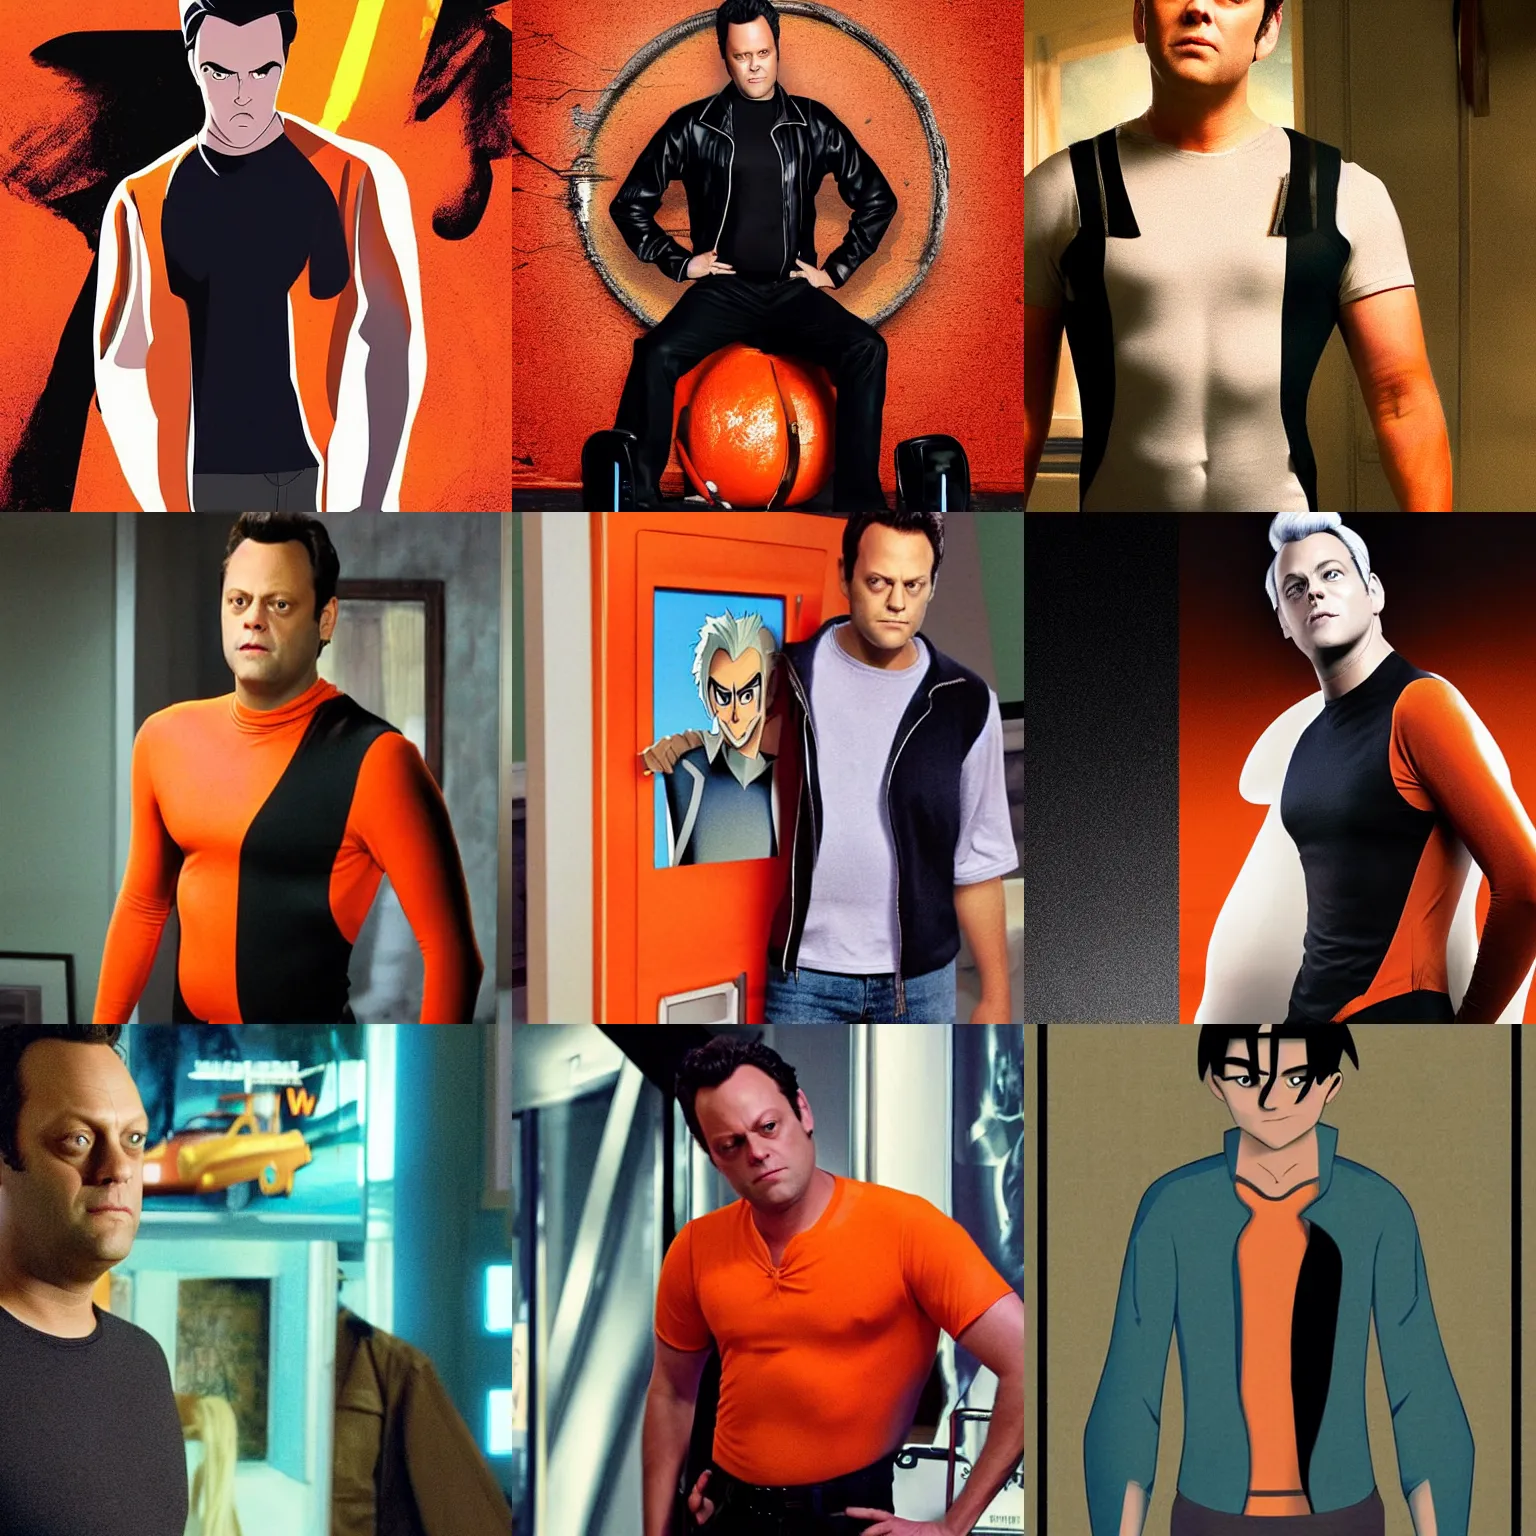 Prompt: a cinematic poster of vince vaughn as jack fenton from the live - action netflix series'danny phantom'; loose - fitting orange bodysuit with black neck ; digital photograph